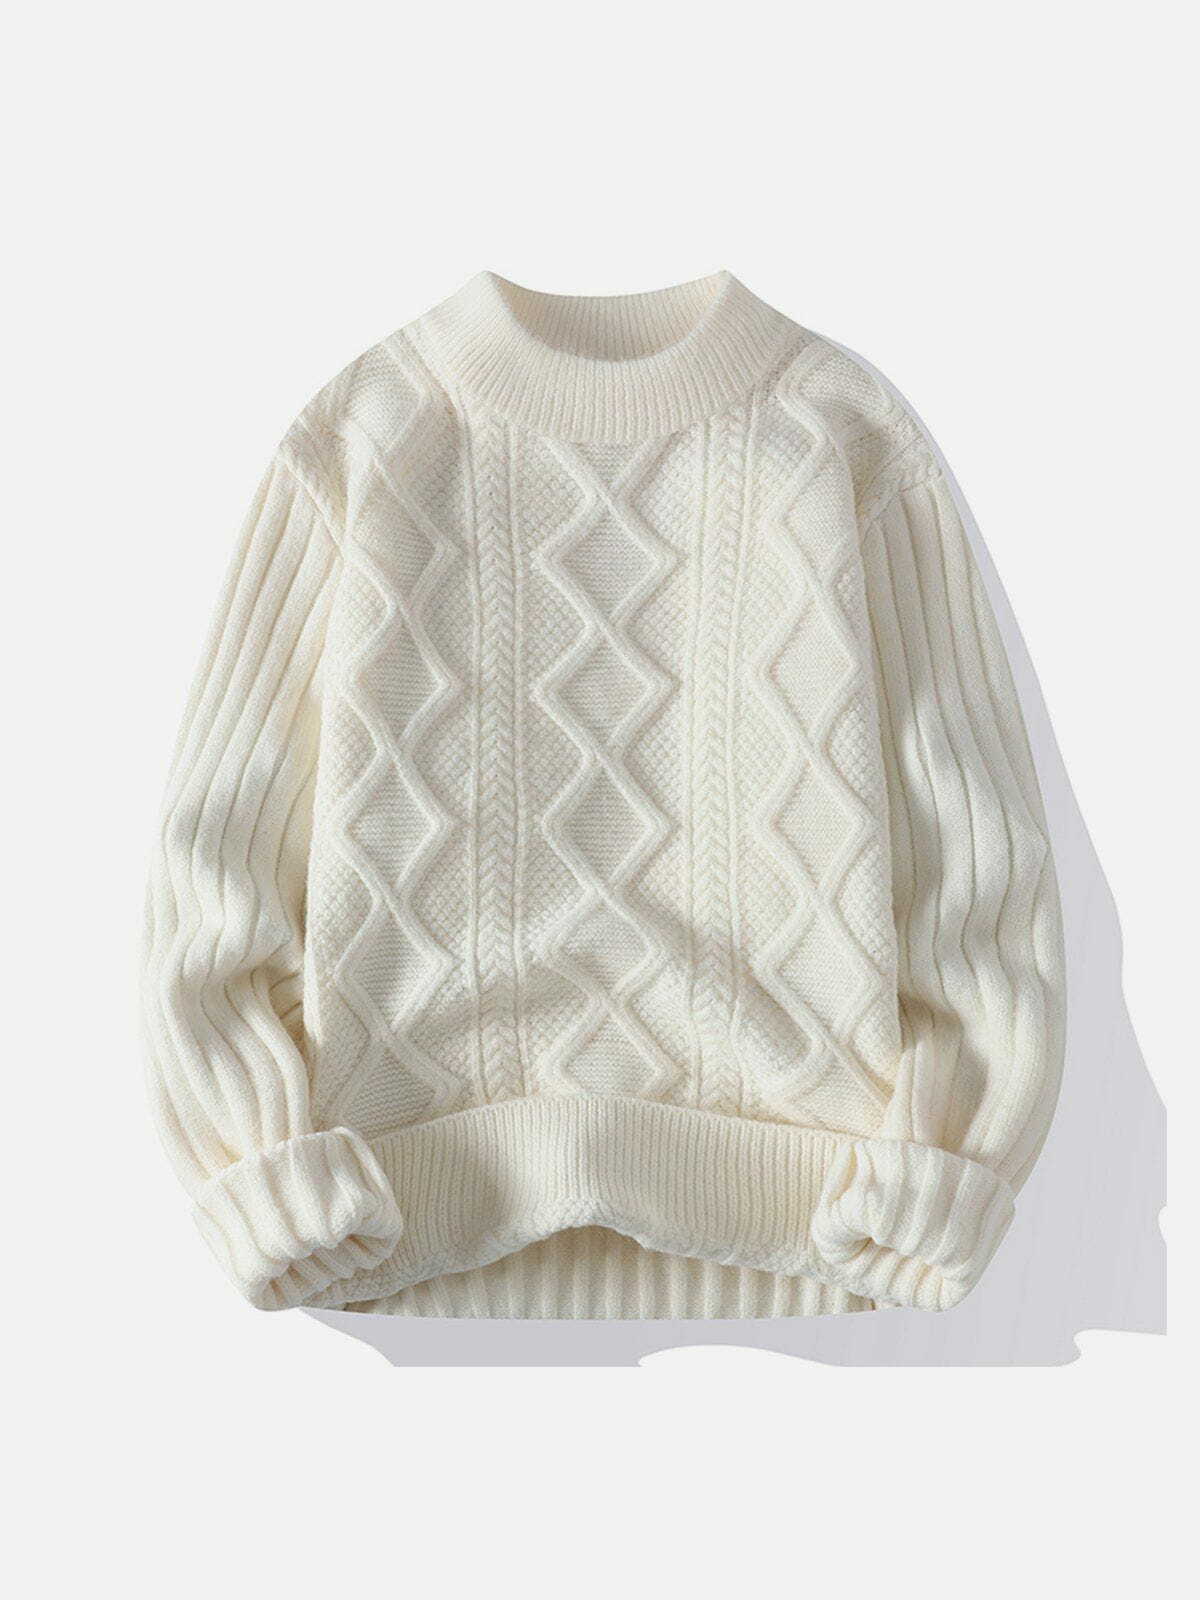 solid color knit sweater edgy streetwear statement 5995